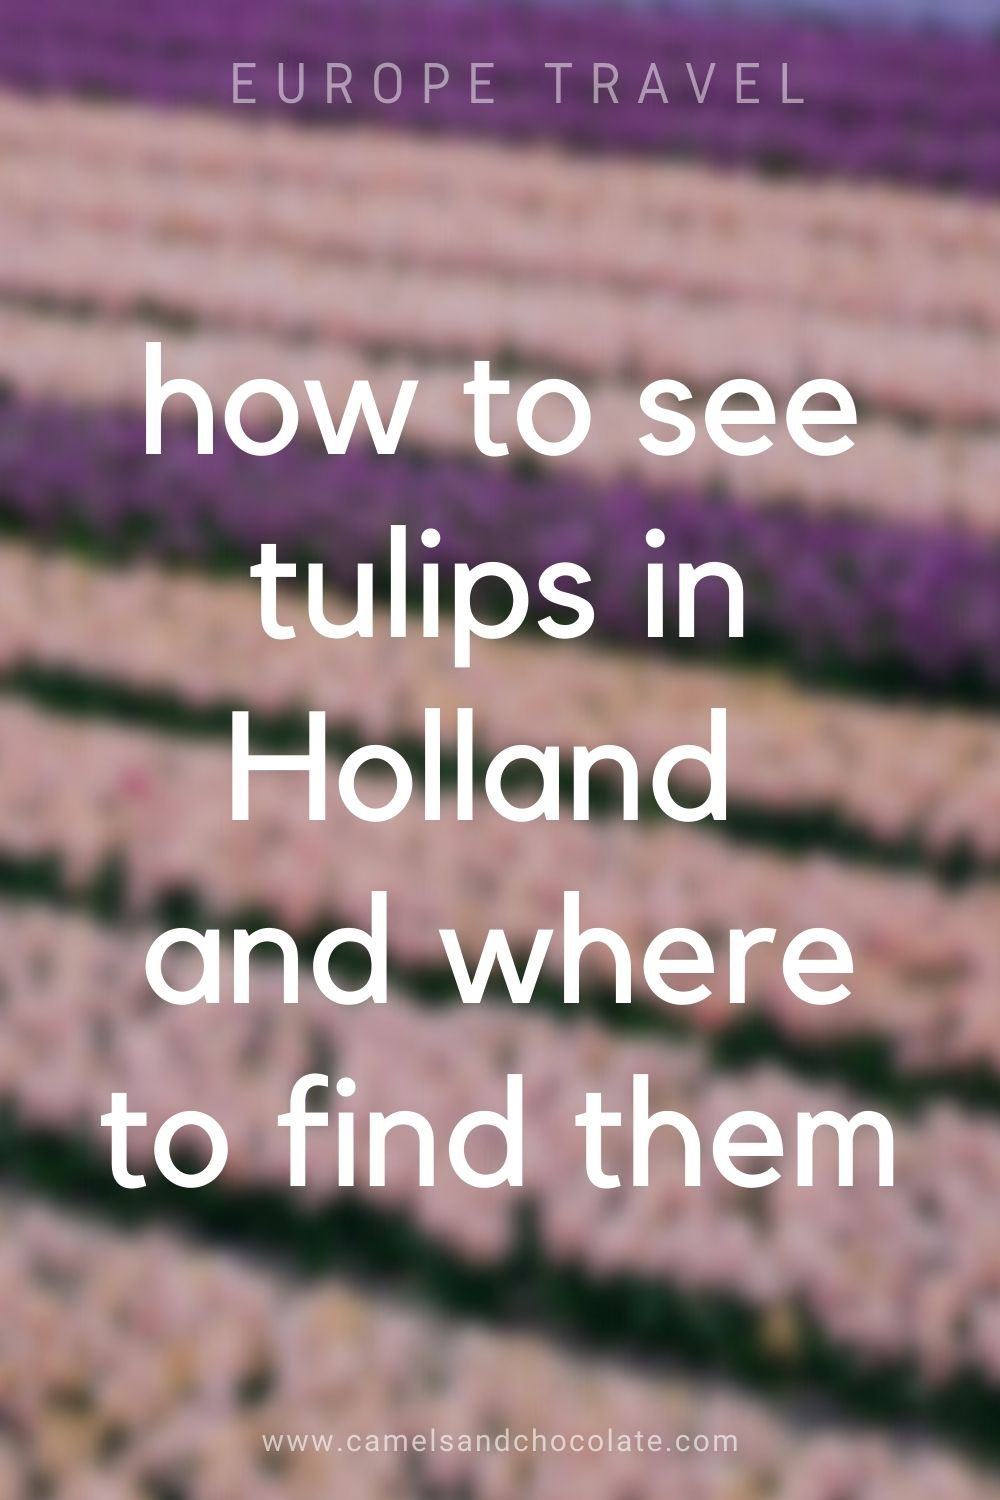 Where to see tulips in Holland during tulip season